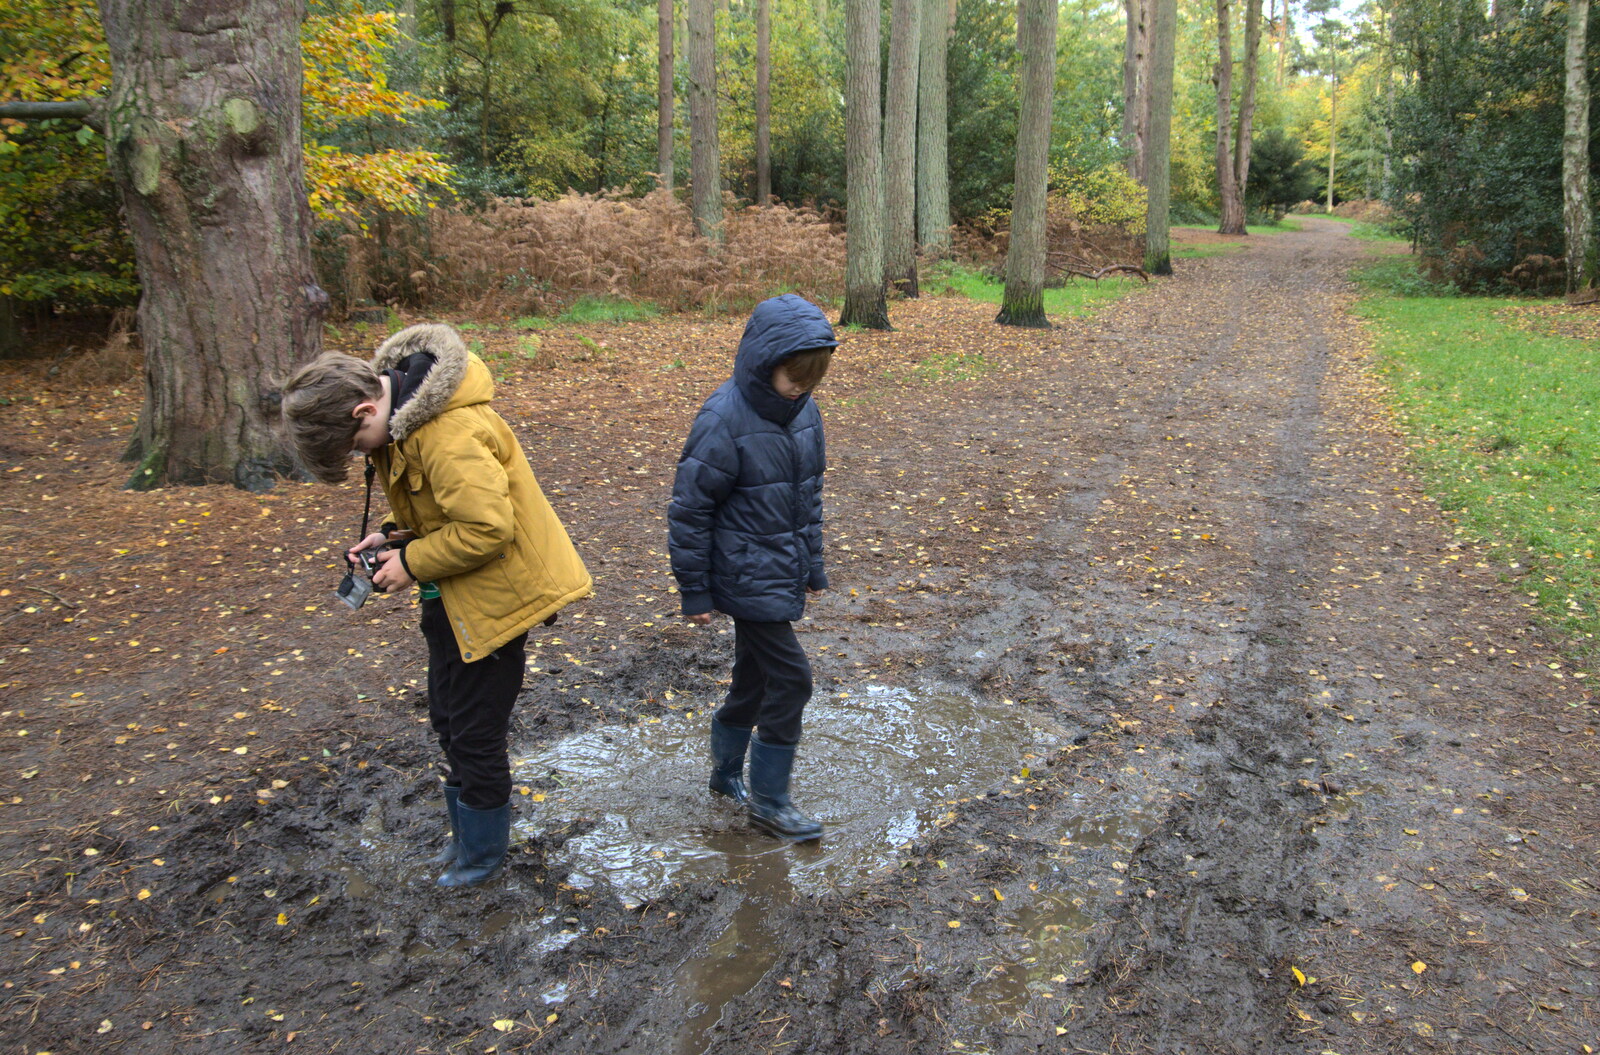 Fred and Harry splash about in puddles from A Trip to Sandringham Estate, Norfolk - 31st October 2020